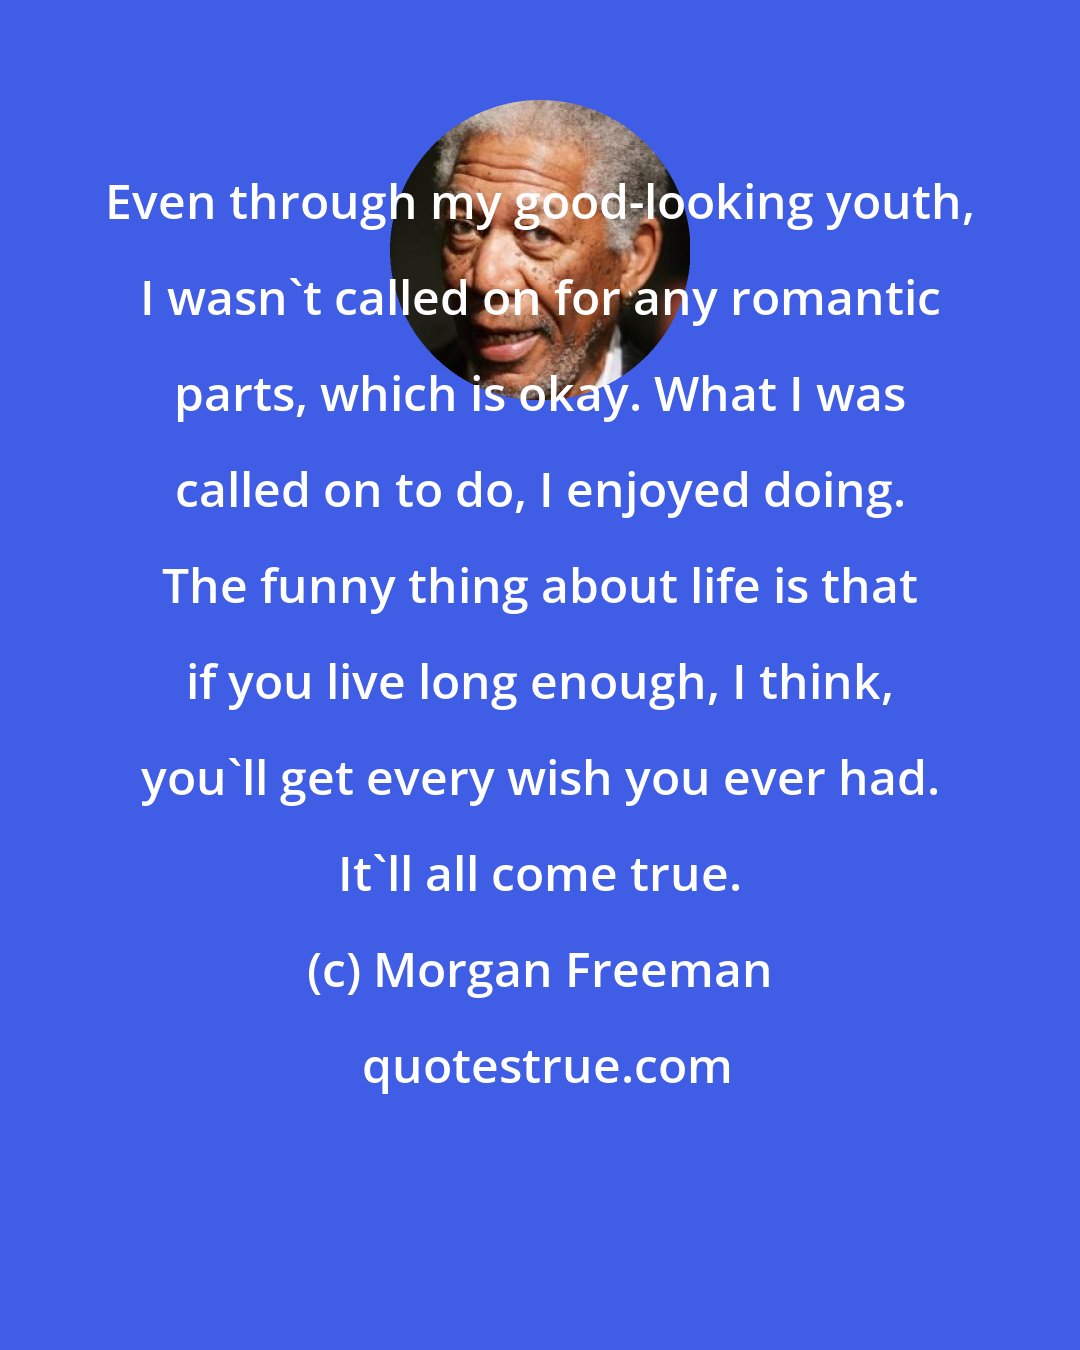 Morgan Freeman: Even through my good-looking youth, I wasn't called on for any romantic parts, which is okay. What I was called on to do, I enjoyed doing. The funny thing about life is that if you live long enough, I think, you'll get every wish you ever had. It'll all come true.